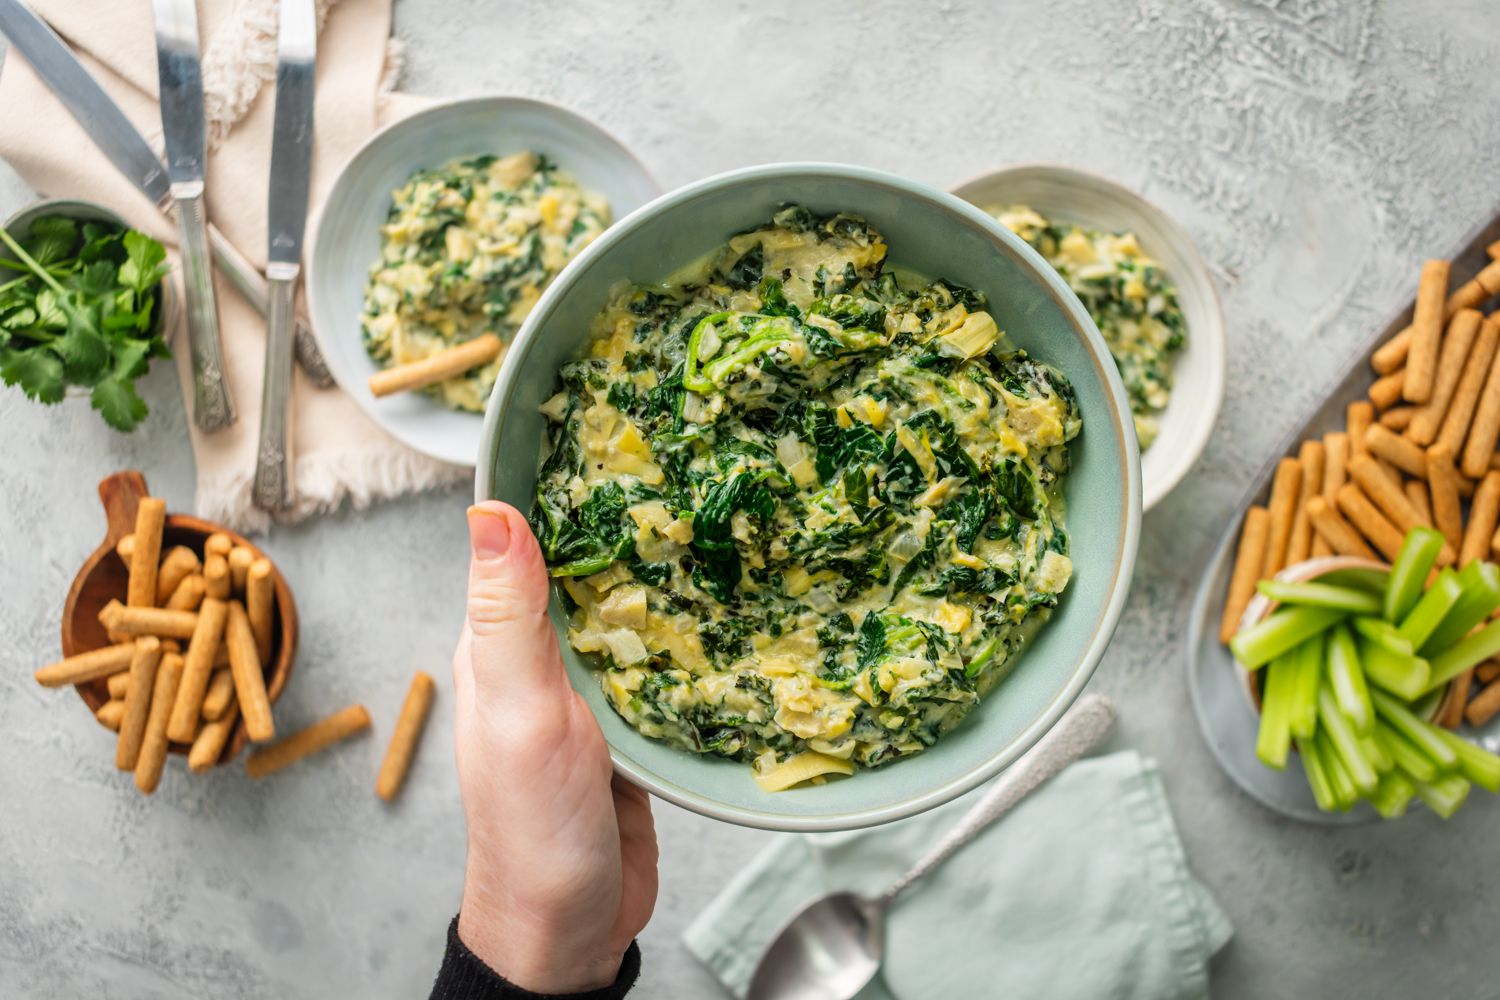 Spinach and artichoke dip with kale, Greek yogurt, and cheese in a bowl being held up by a hand.